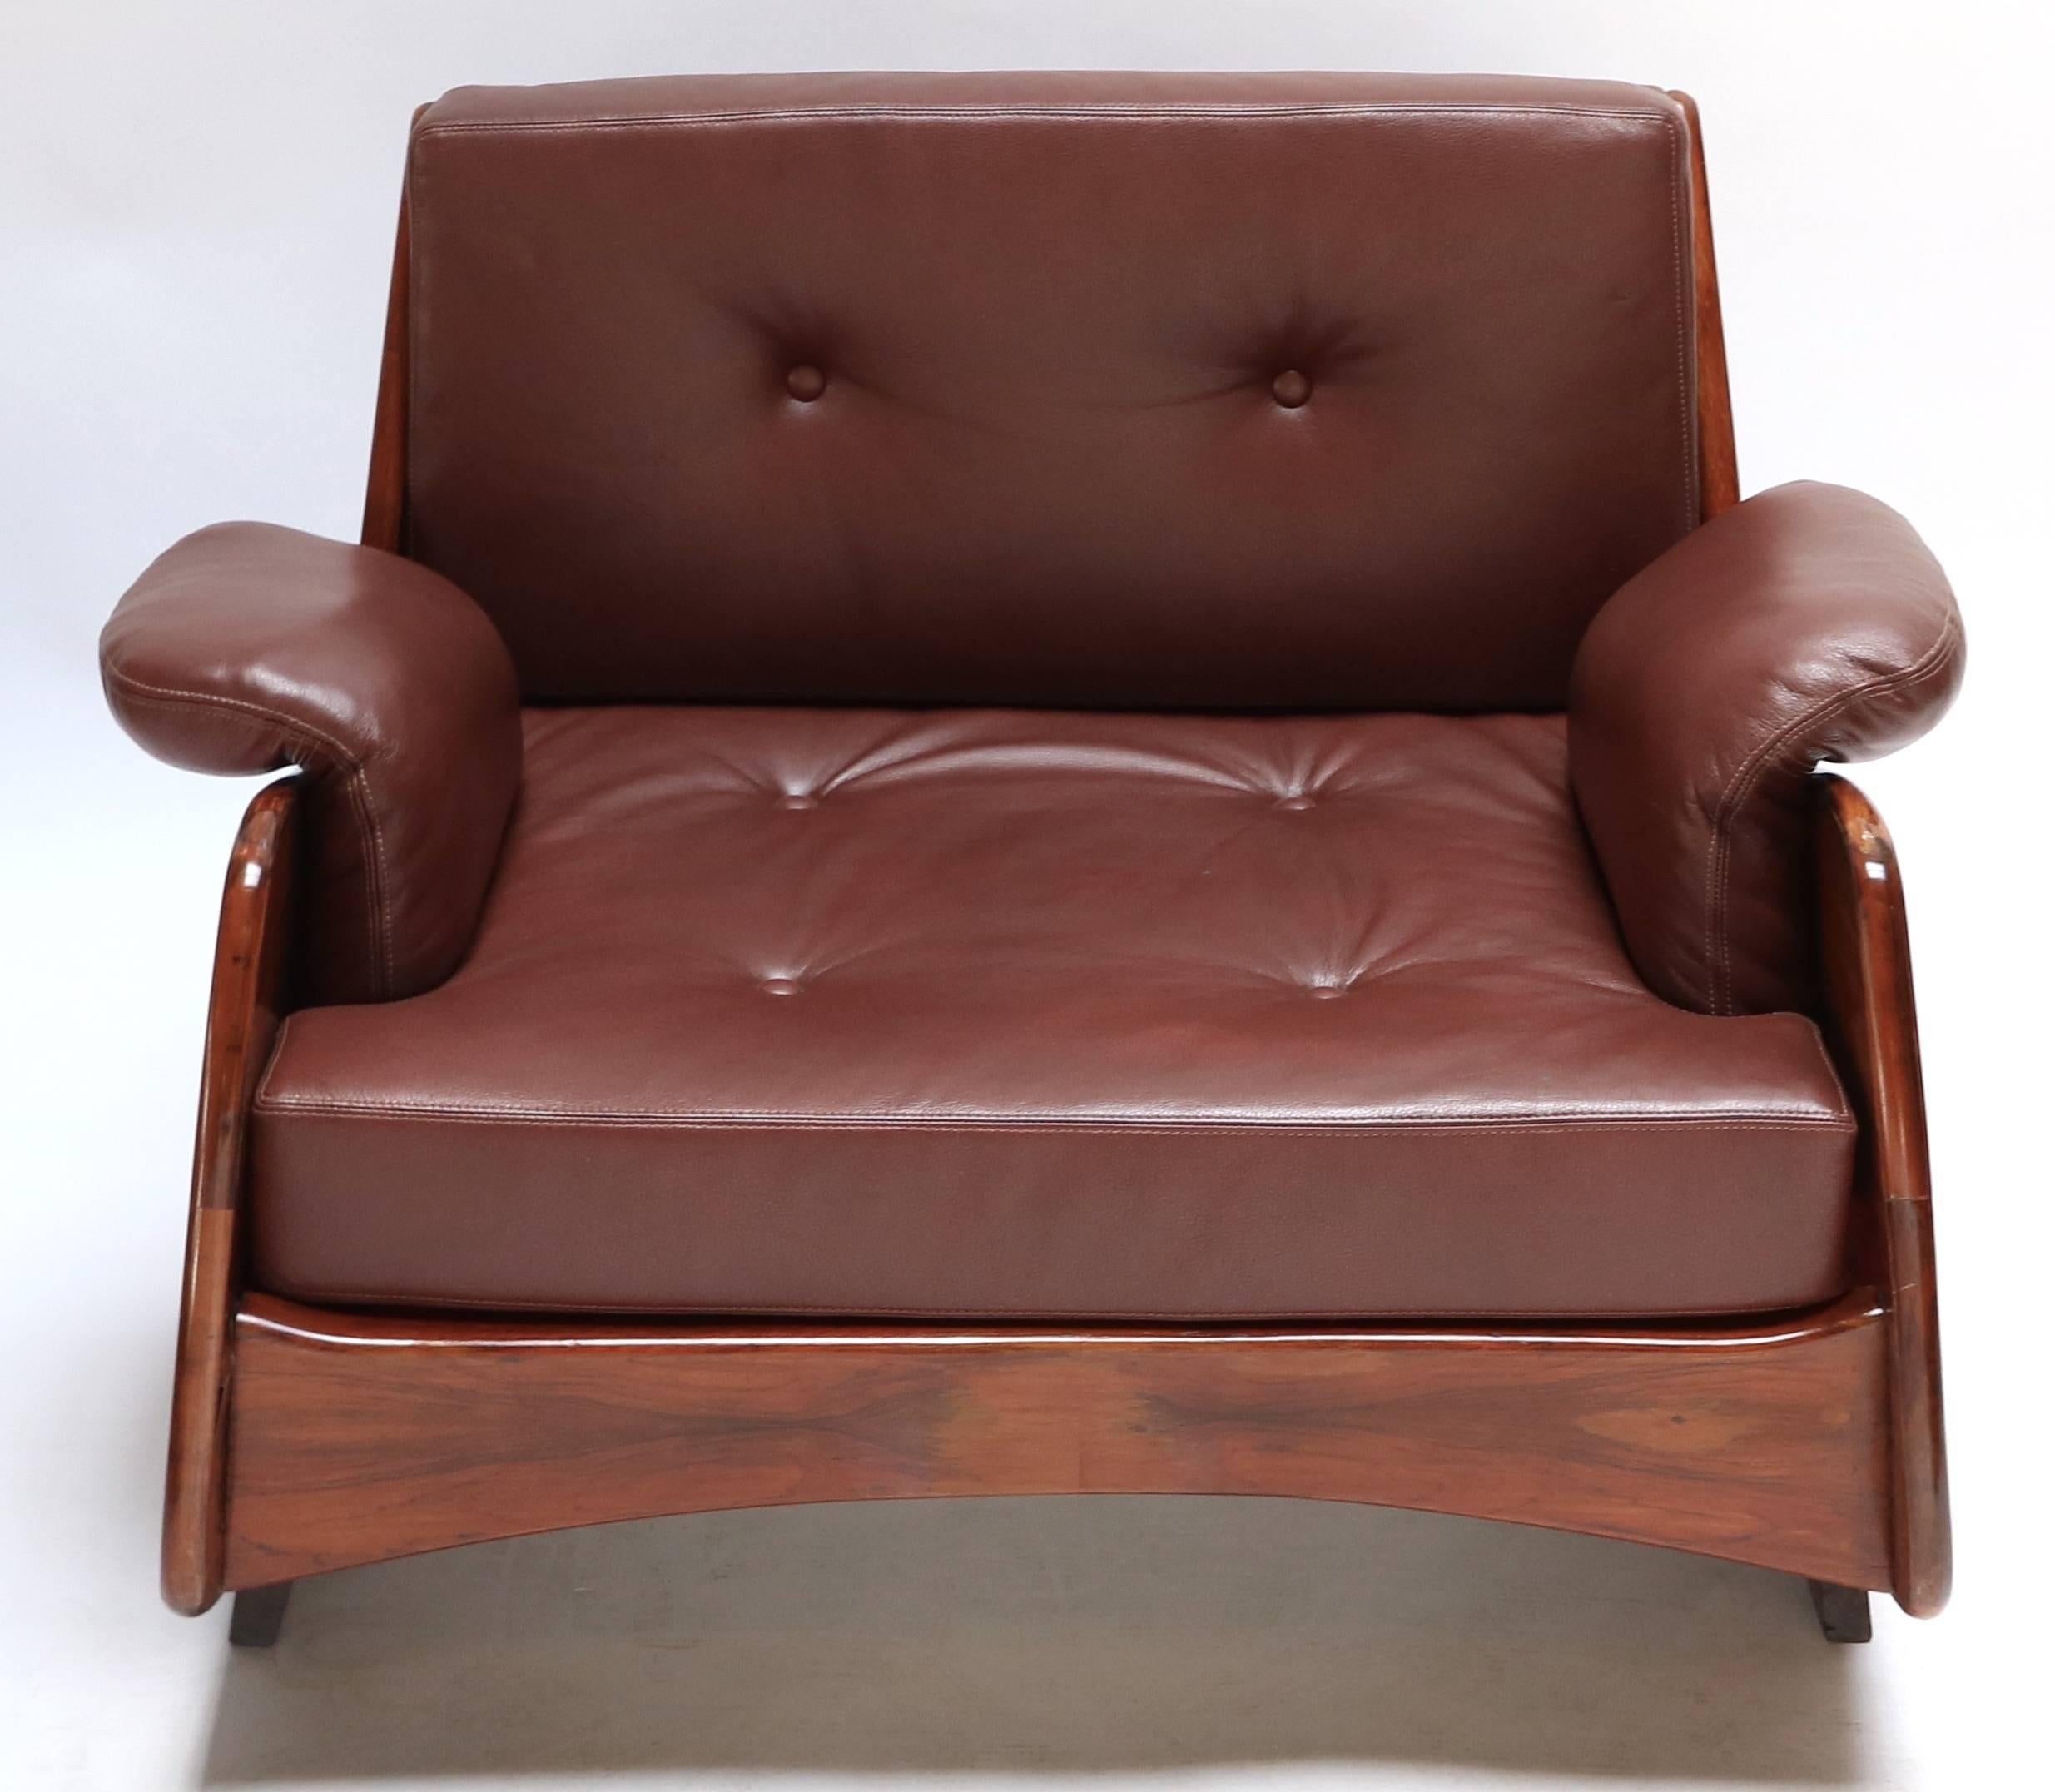 Pair of 1960s Brazilian jacaranda lounge chairs by Jorge Zalszupin upholstered in burgundy leather.